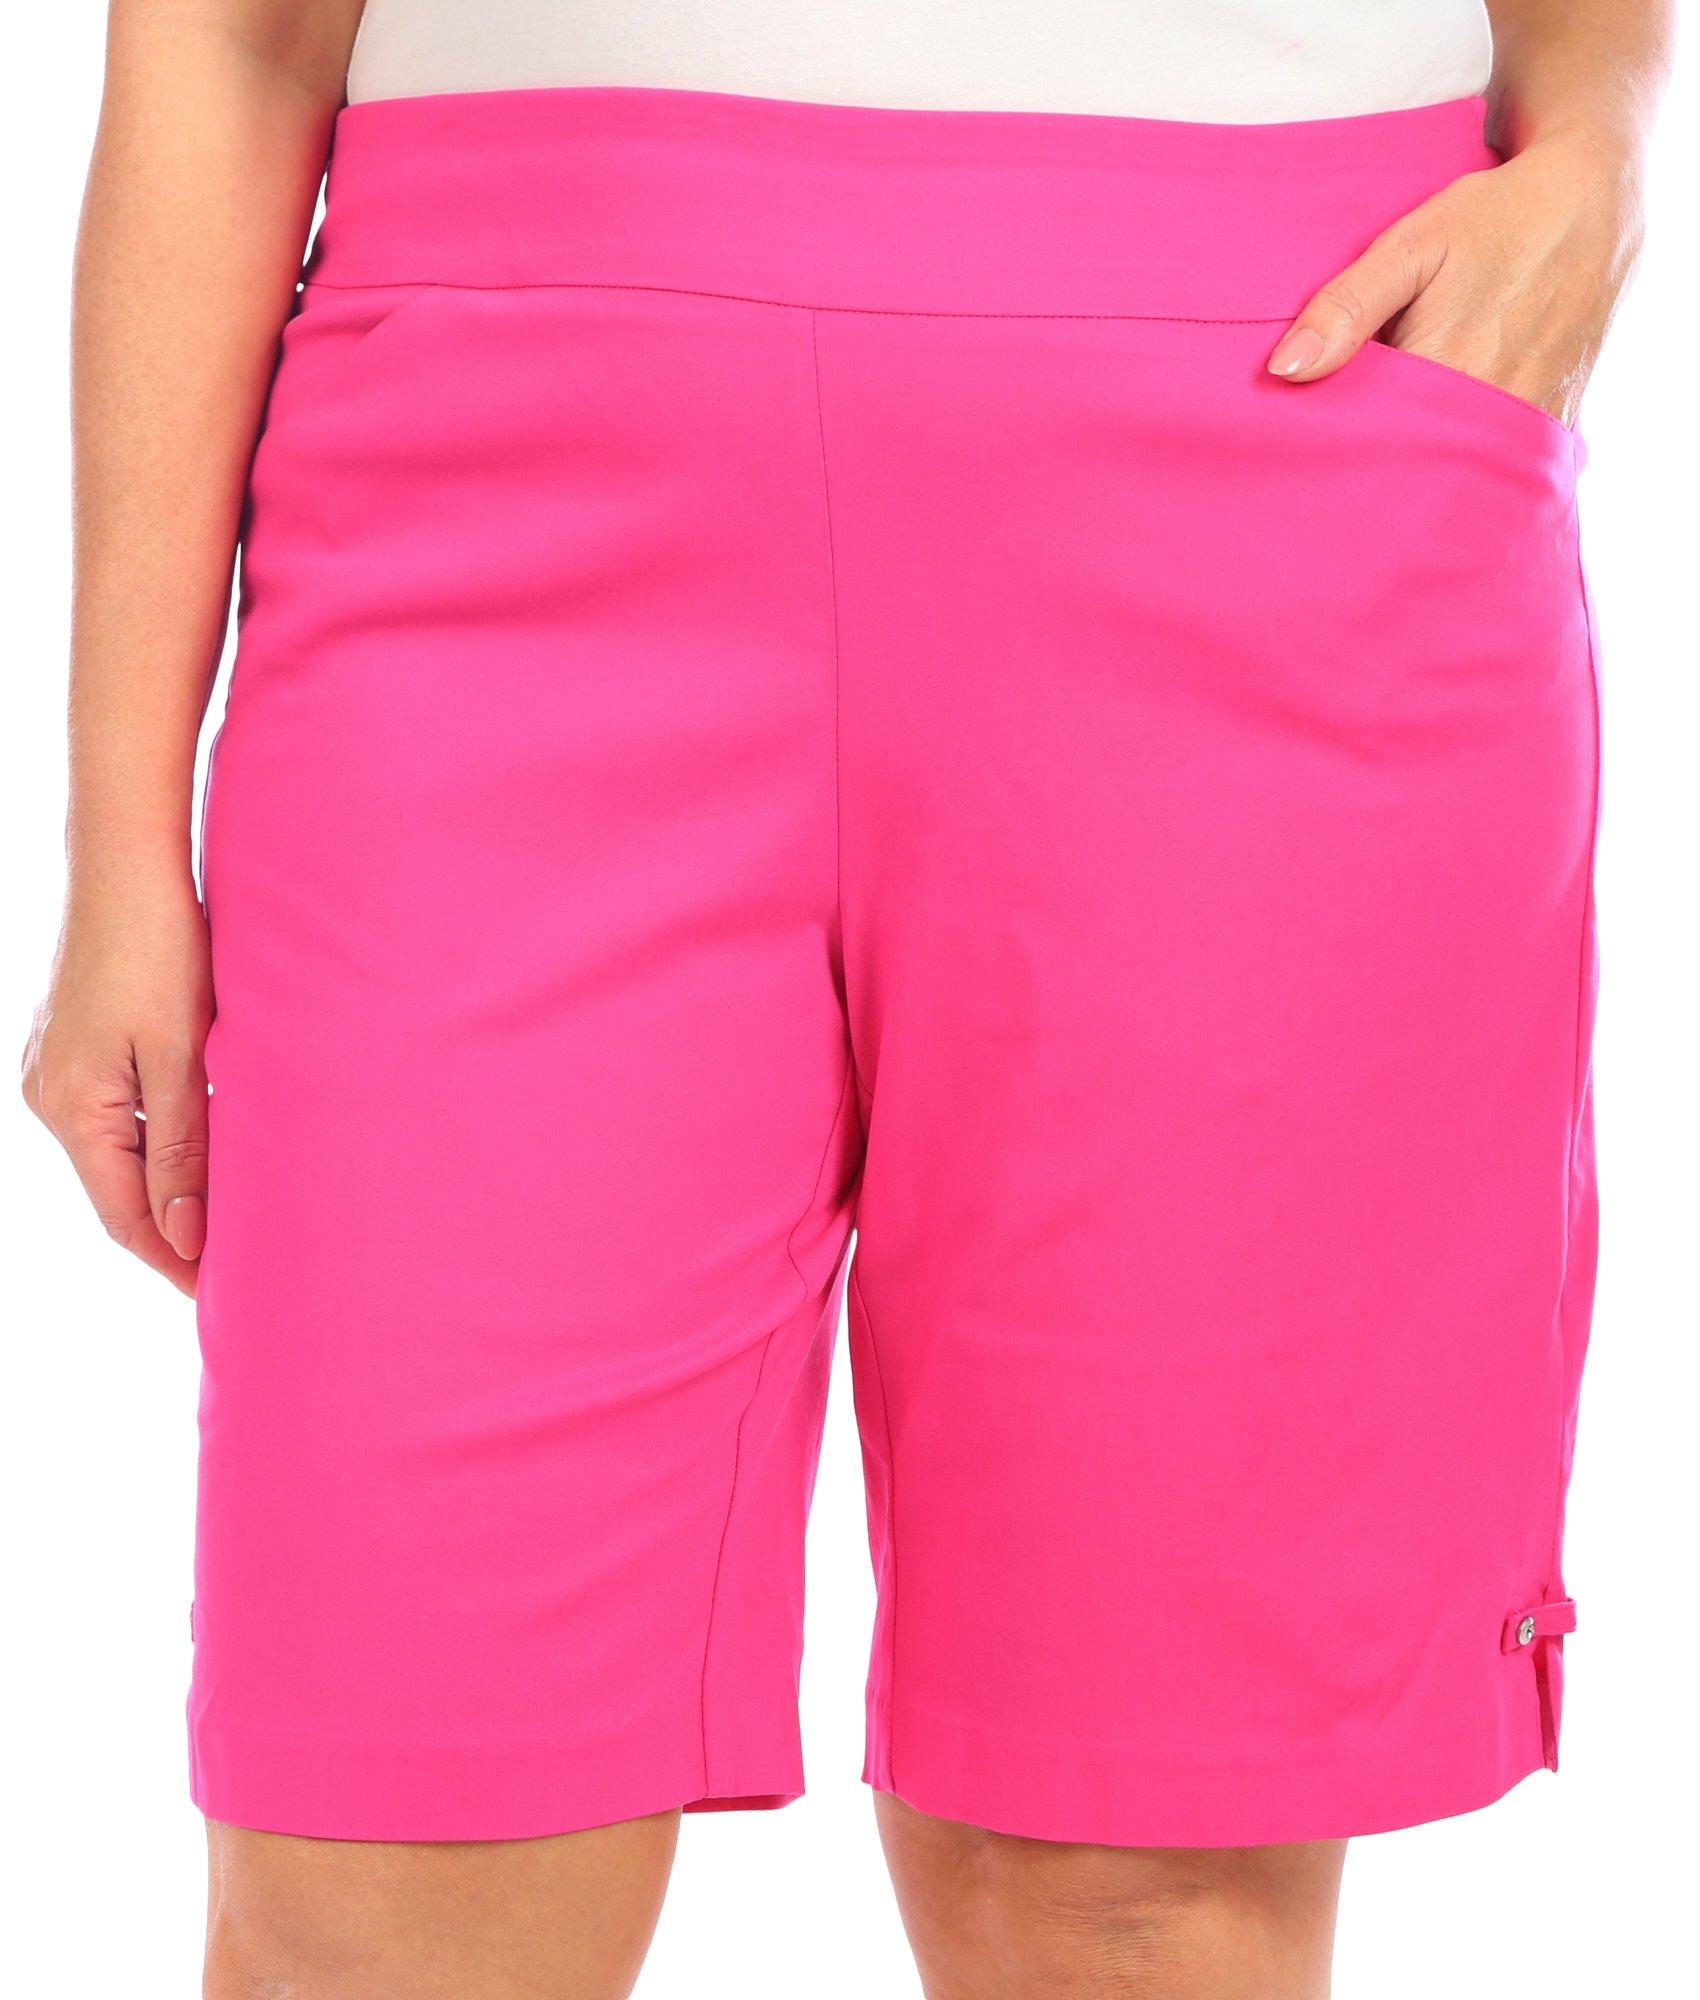 Coral Bay Plus 12 in. Solid Diamond Rivet Shorts